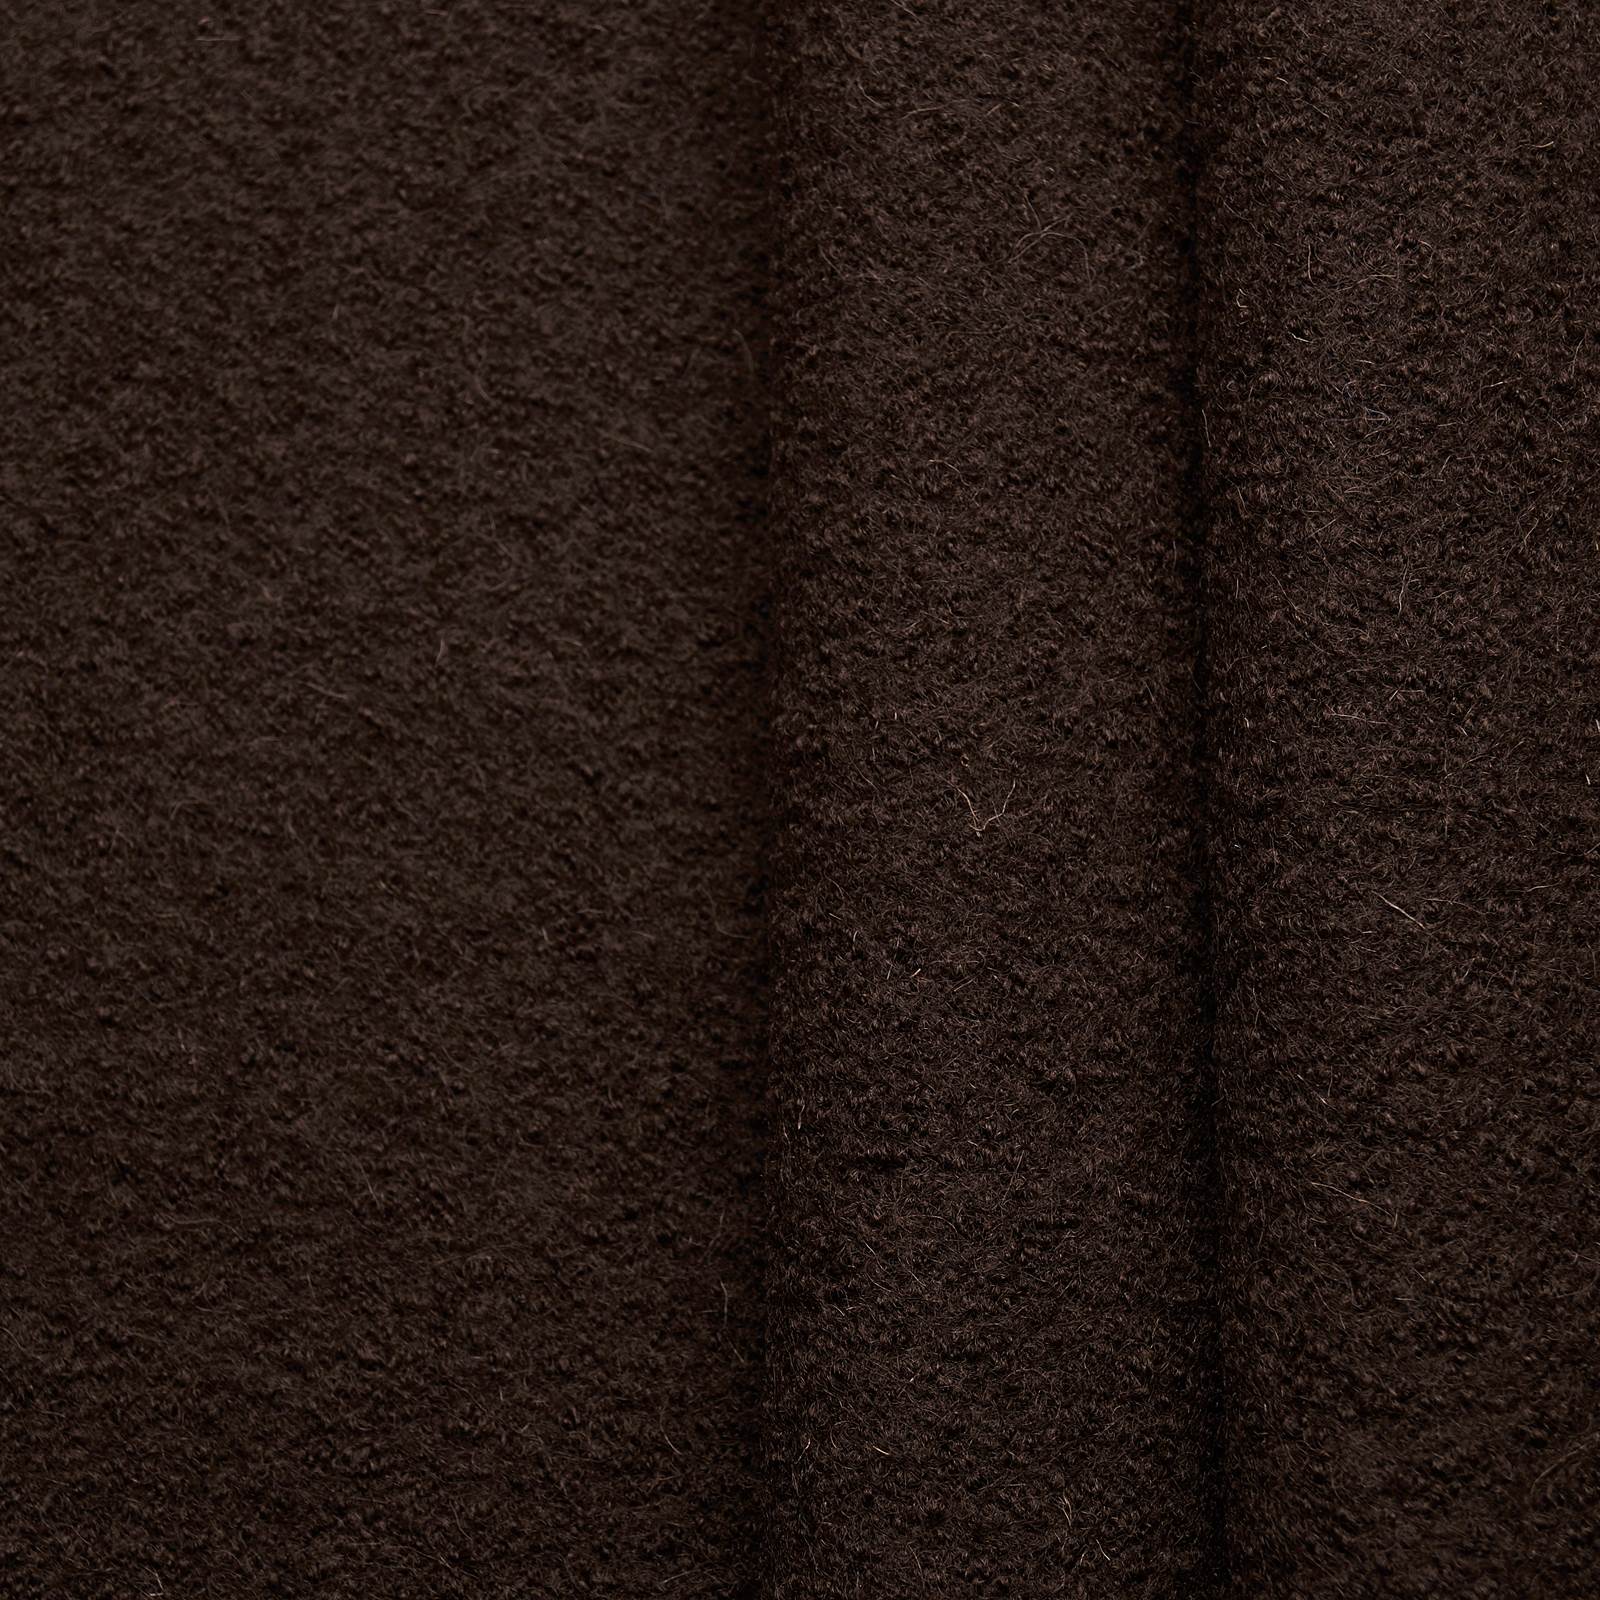 FAVORIT Walkloden - boiled wool / loden - chocolate brown